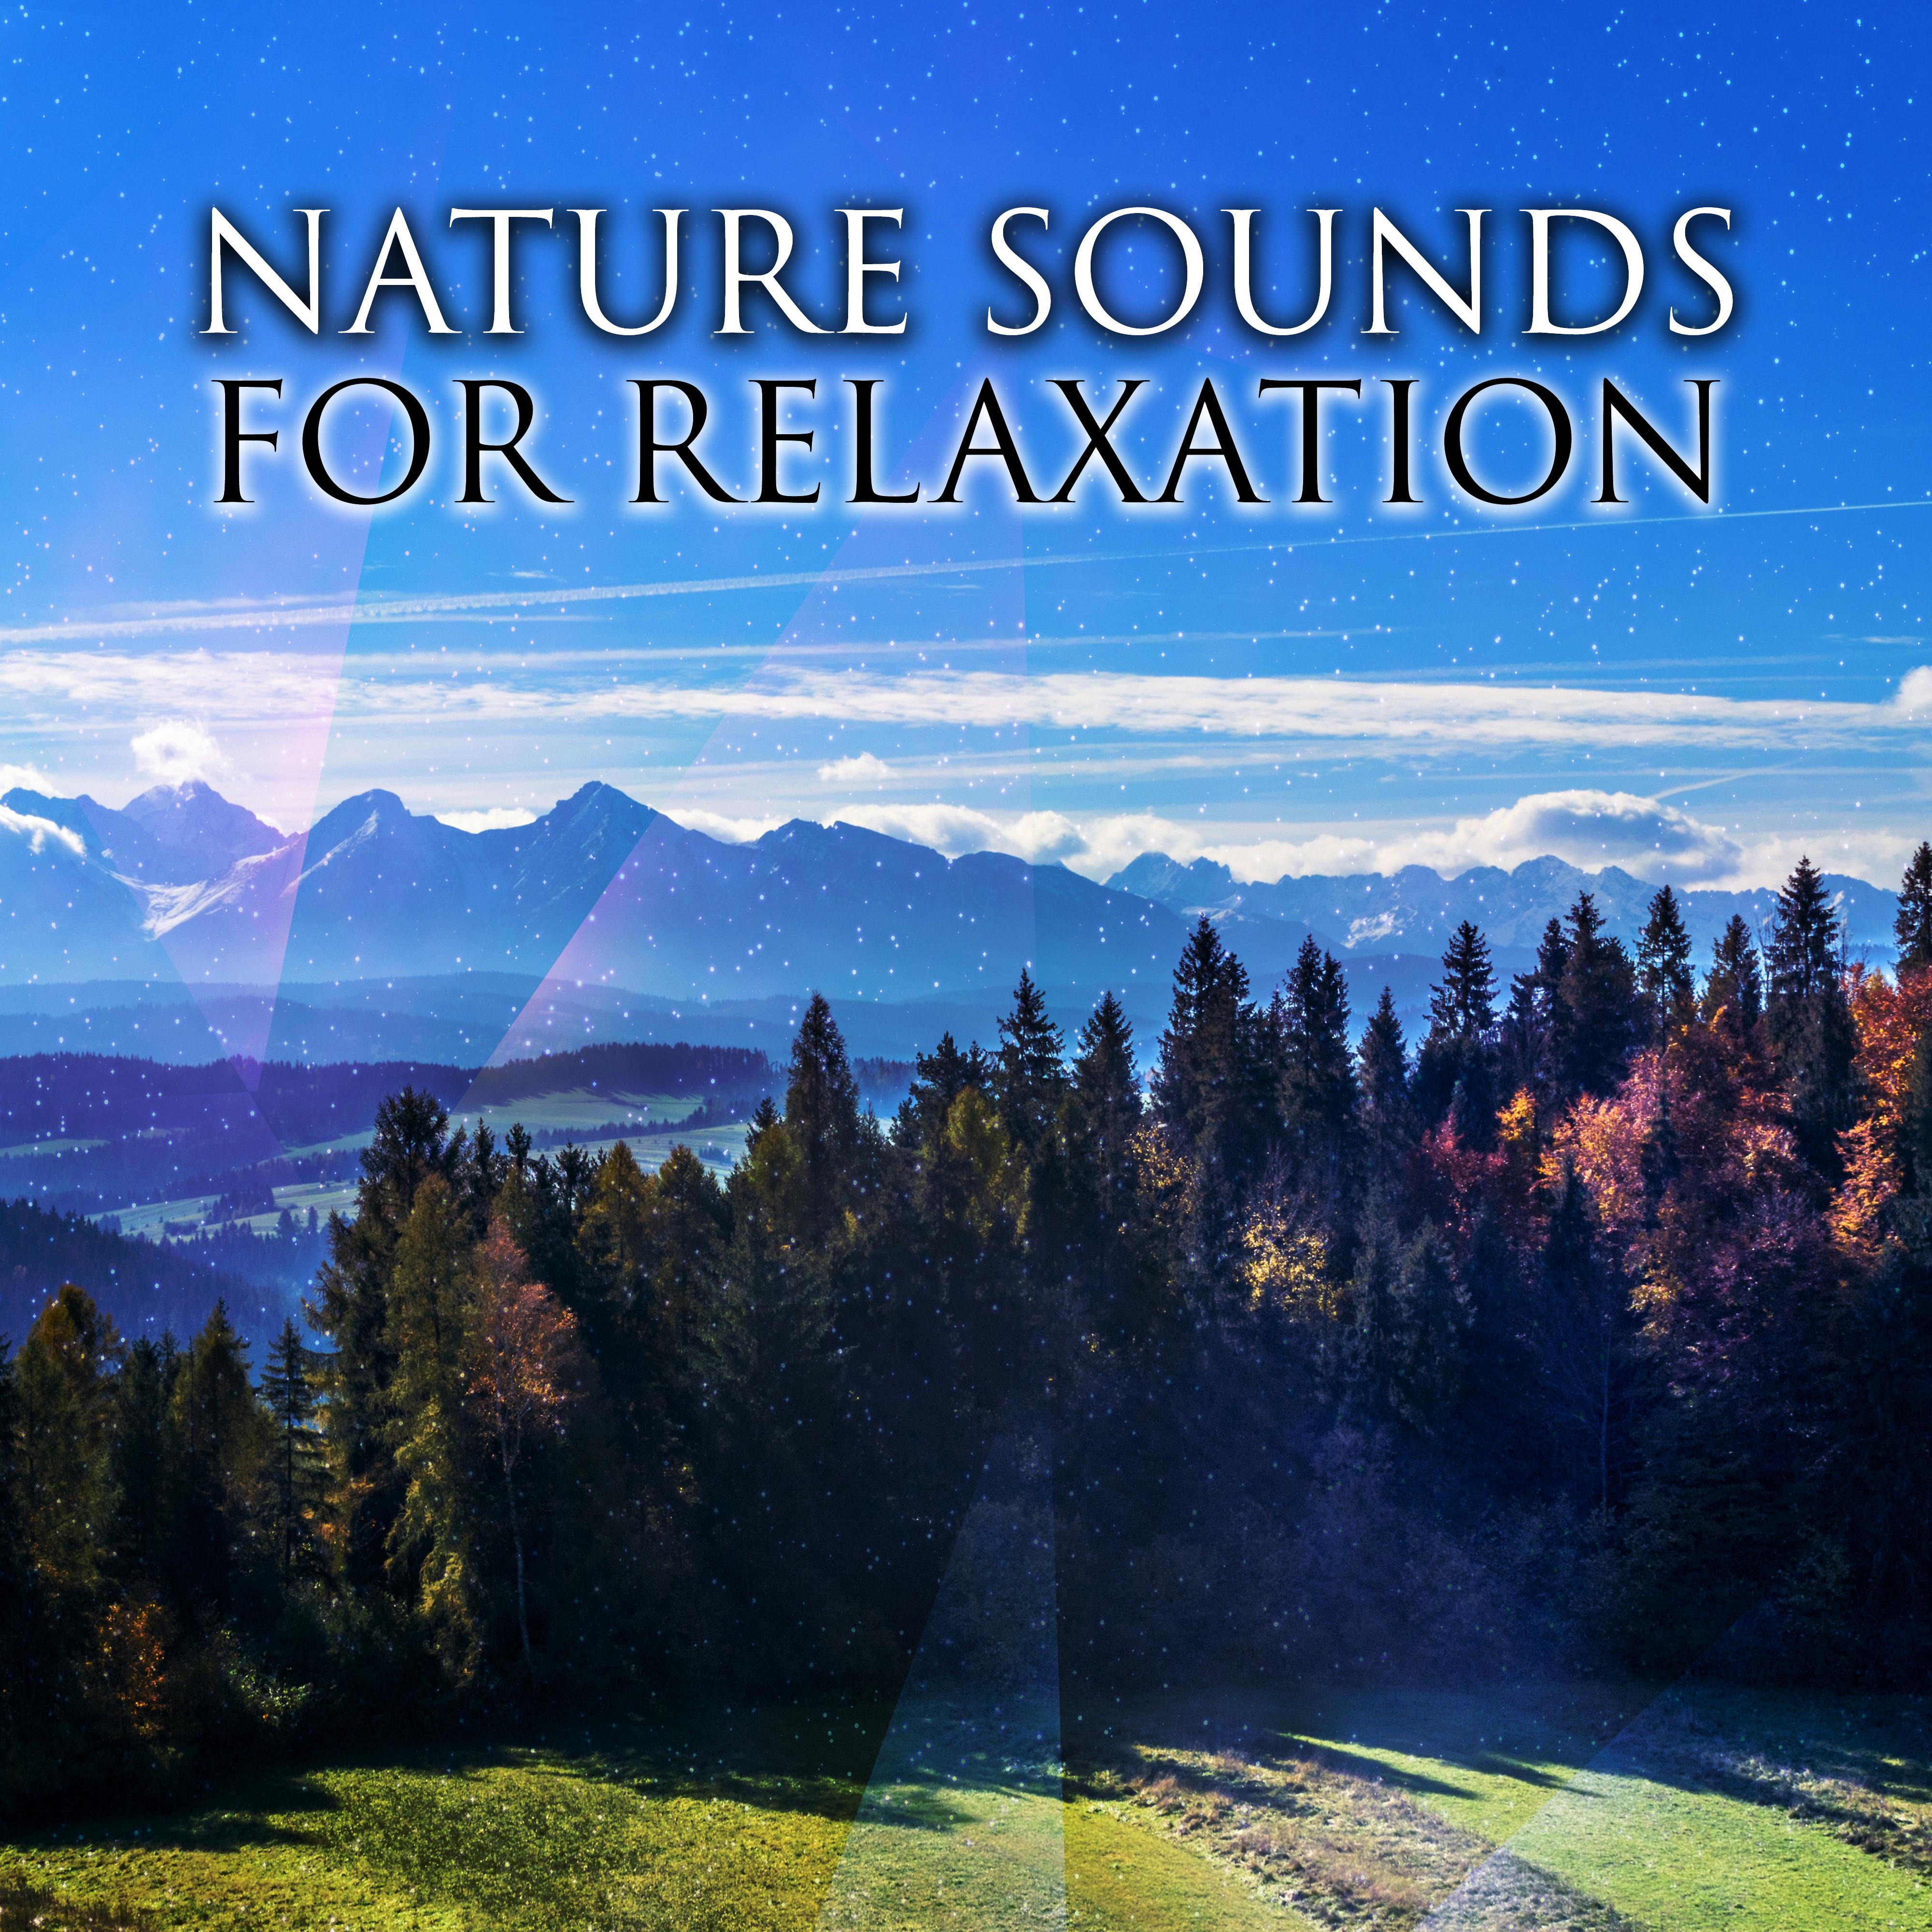 Nature Sounds for Relaxation – Peaceful Music to Rest, Calm Down with New Age Music, Nature Waves, Stress Relief